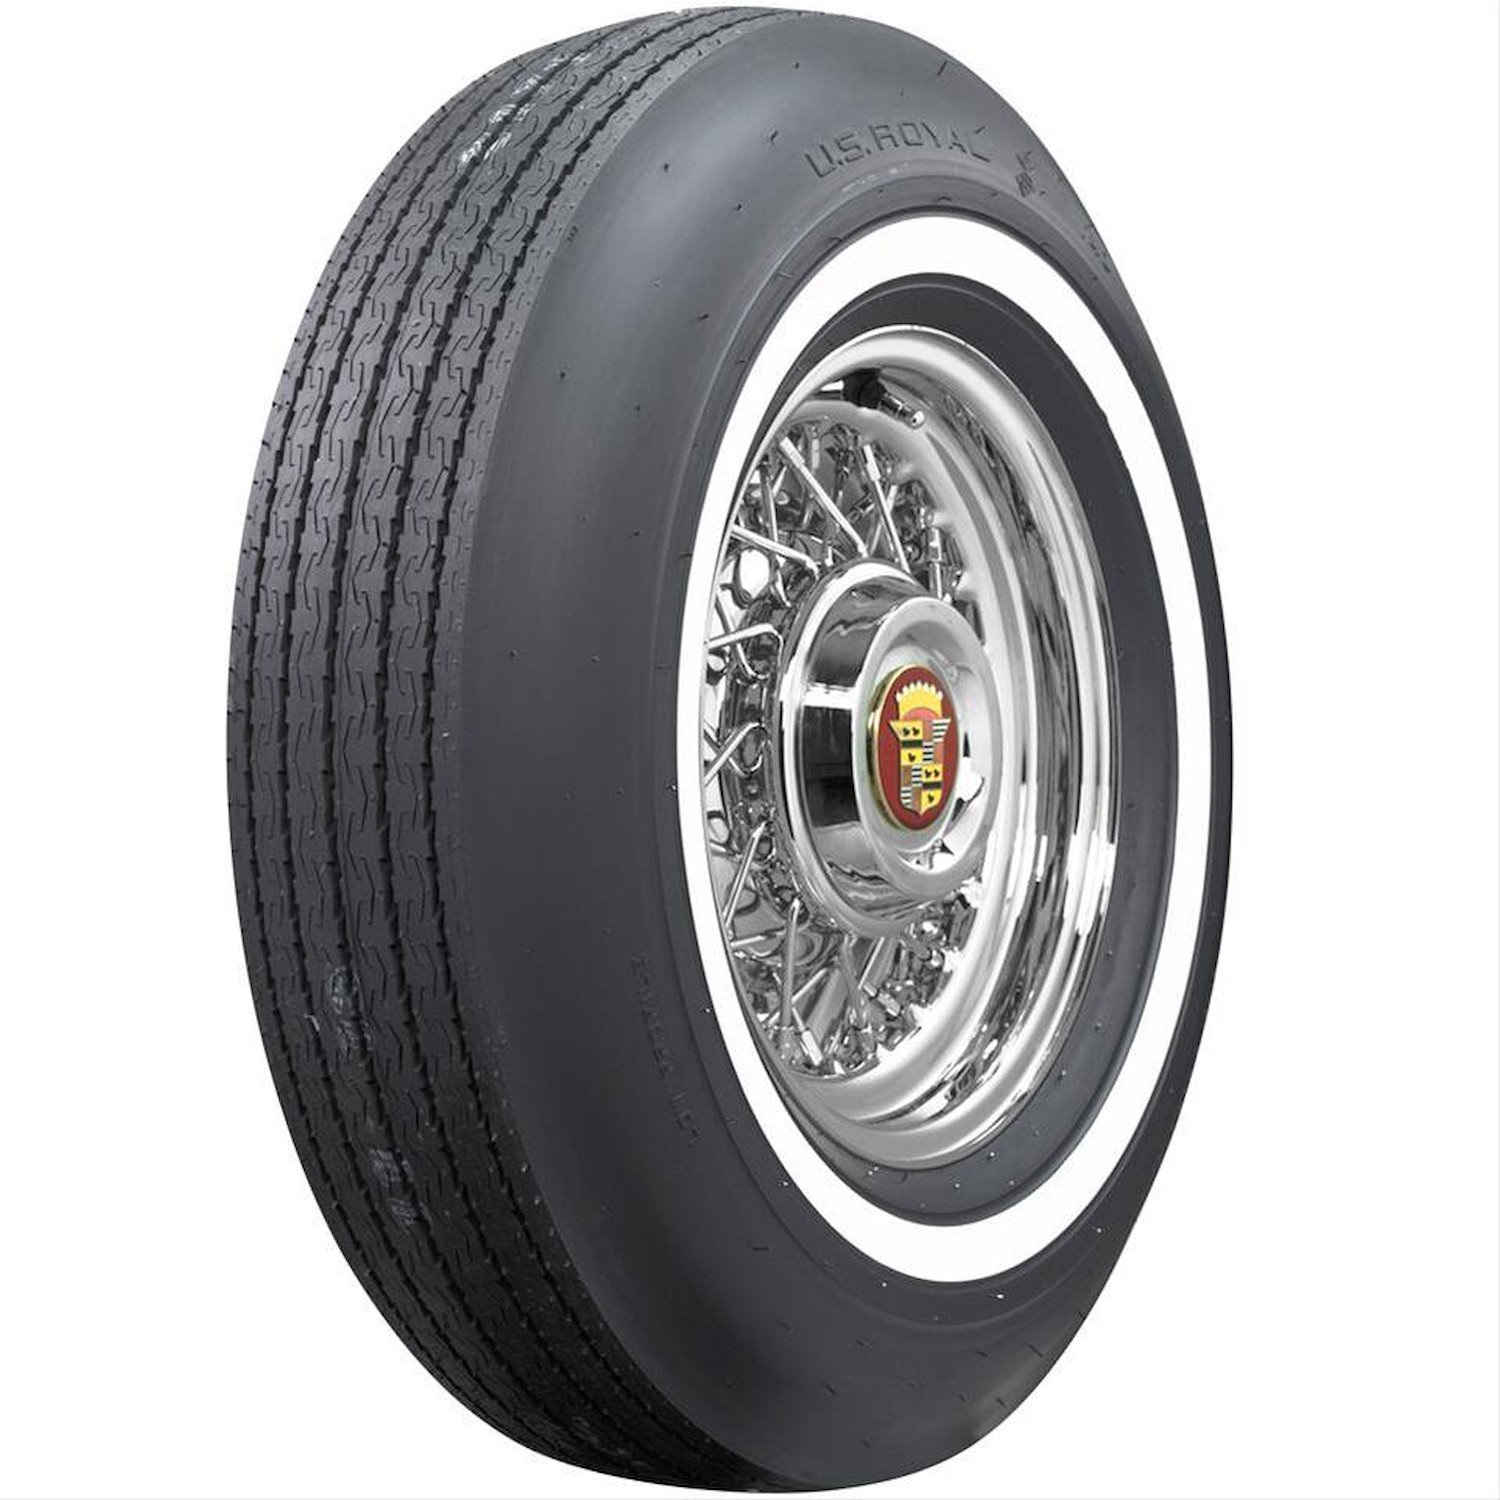 61995 Tire, US Royal 1.00-Inch Whitewall, 840/820-15